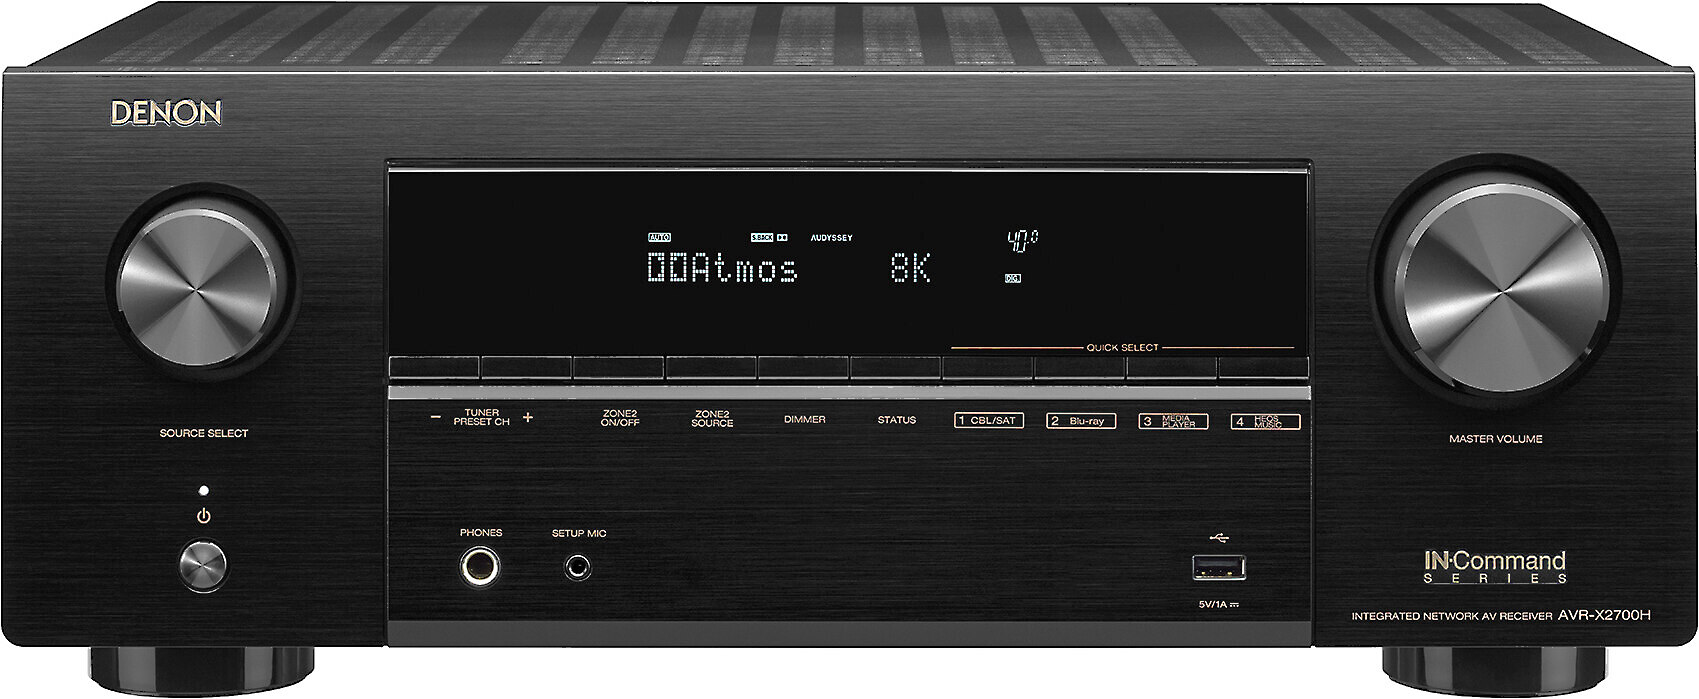 Home Theater Receivers, A/V Receivers, and Surround Sound Receivers